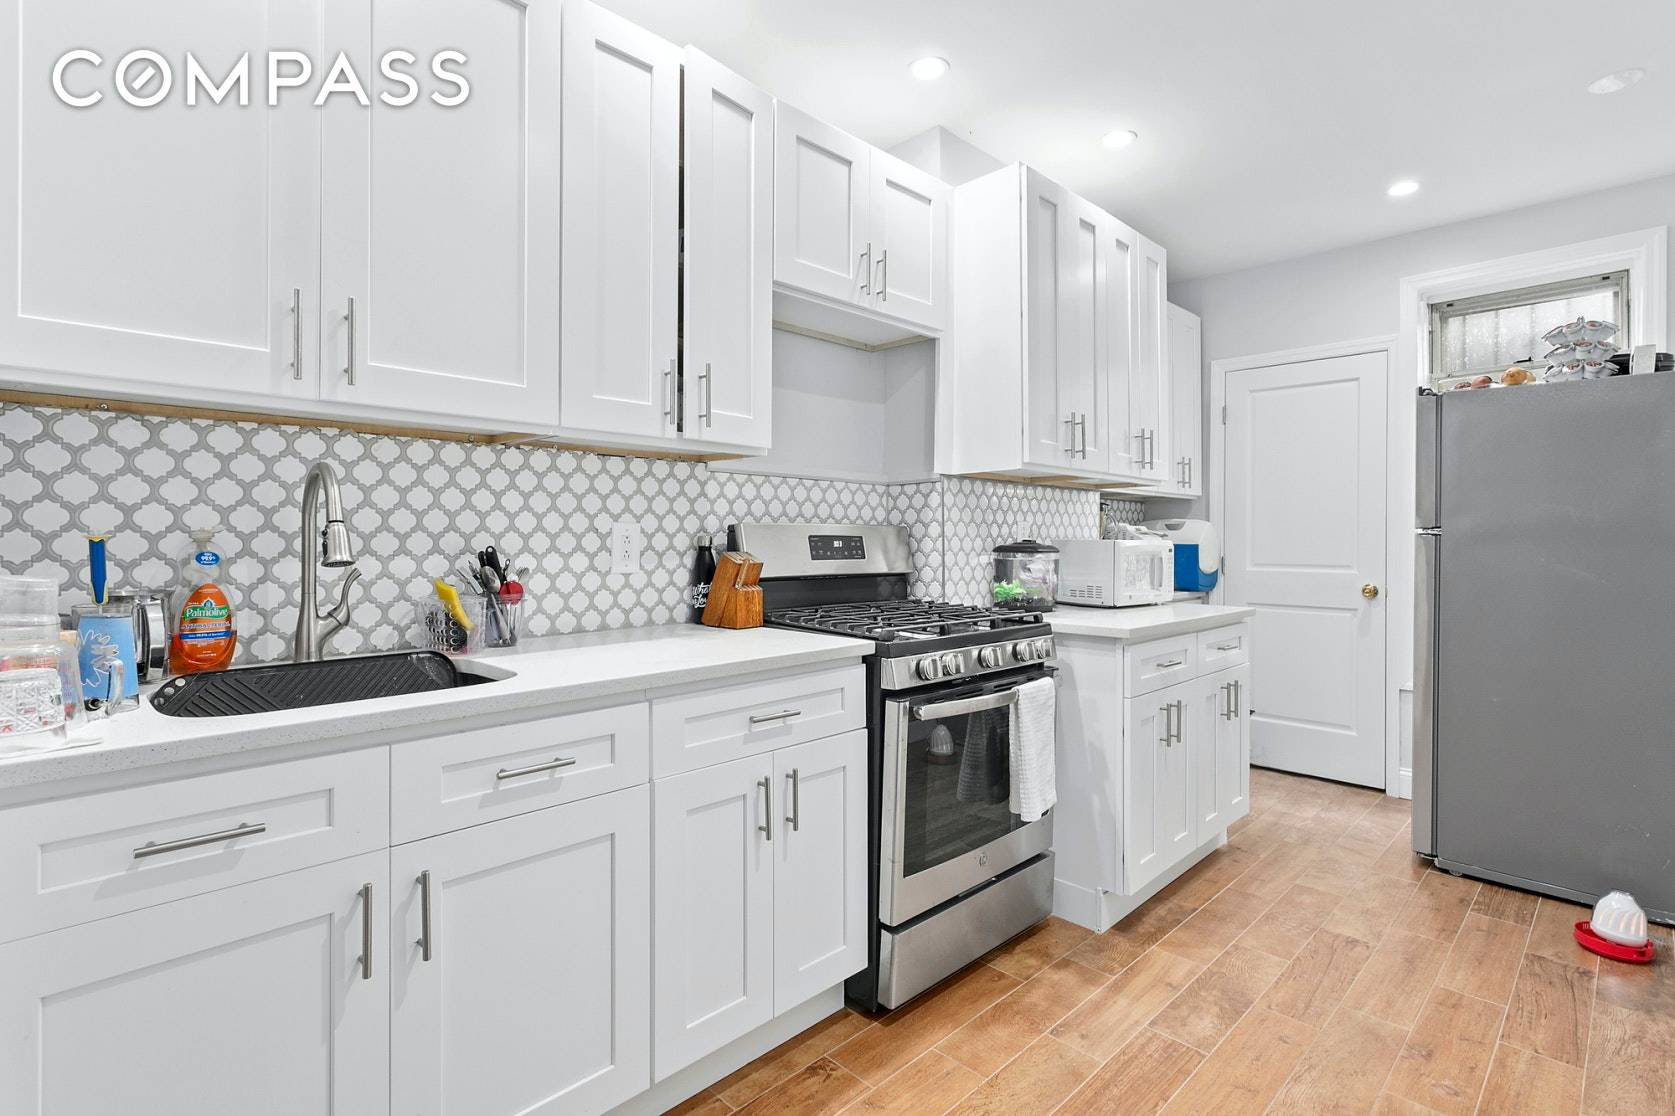 Located in the flourishing and desirable neighborhood of East Flatbush, 2 family property features a 3 bedroom apartment over a 2 bedroom over a fully finished basement.